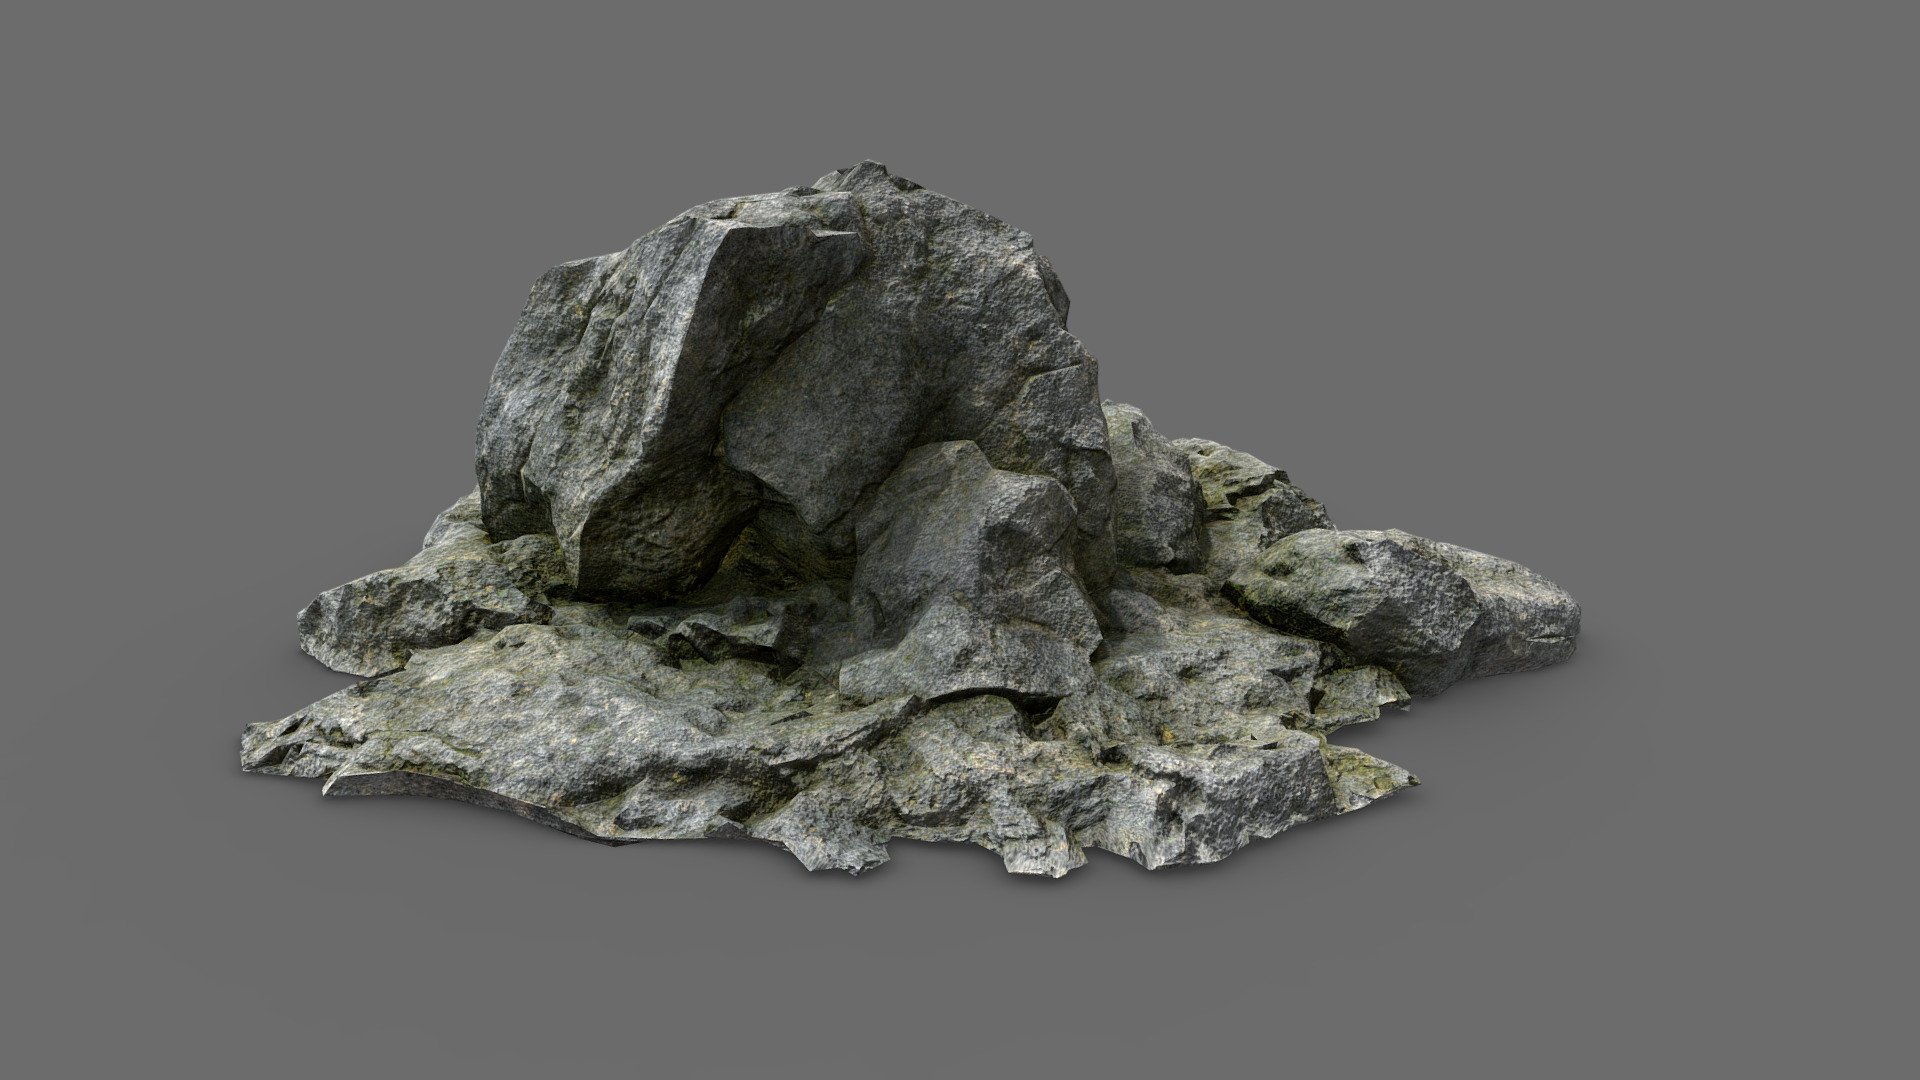 Rock 3_9 low poly

Topology: Tris

Polygon count: 8982

Vertices count: 4491

Textures: Diffuse, Normal, Specular, Glossiness, Curvature, Height, Ambient Occlusion ( all in 4k resolution)

UV mapped with non-overlapping

All files are zipped in one folder. Contains 3 file formats obj, ma &amp; fbx

Useful for games, renders, background scenes and other graphical projects 3d model